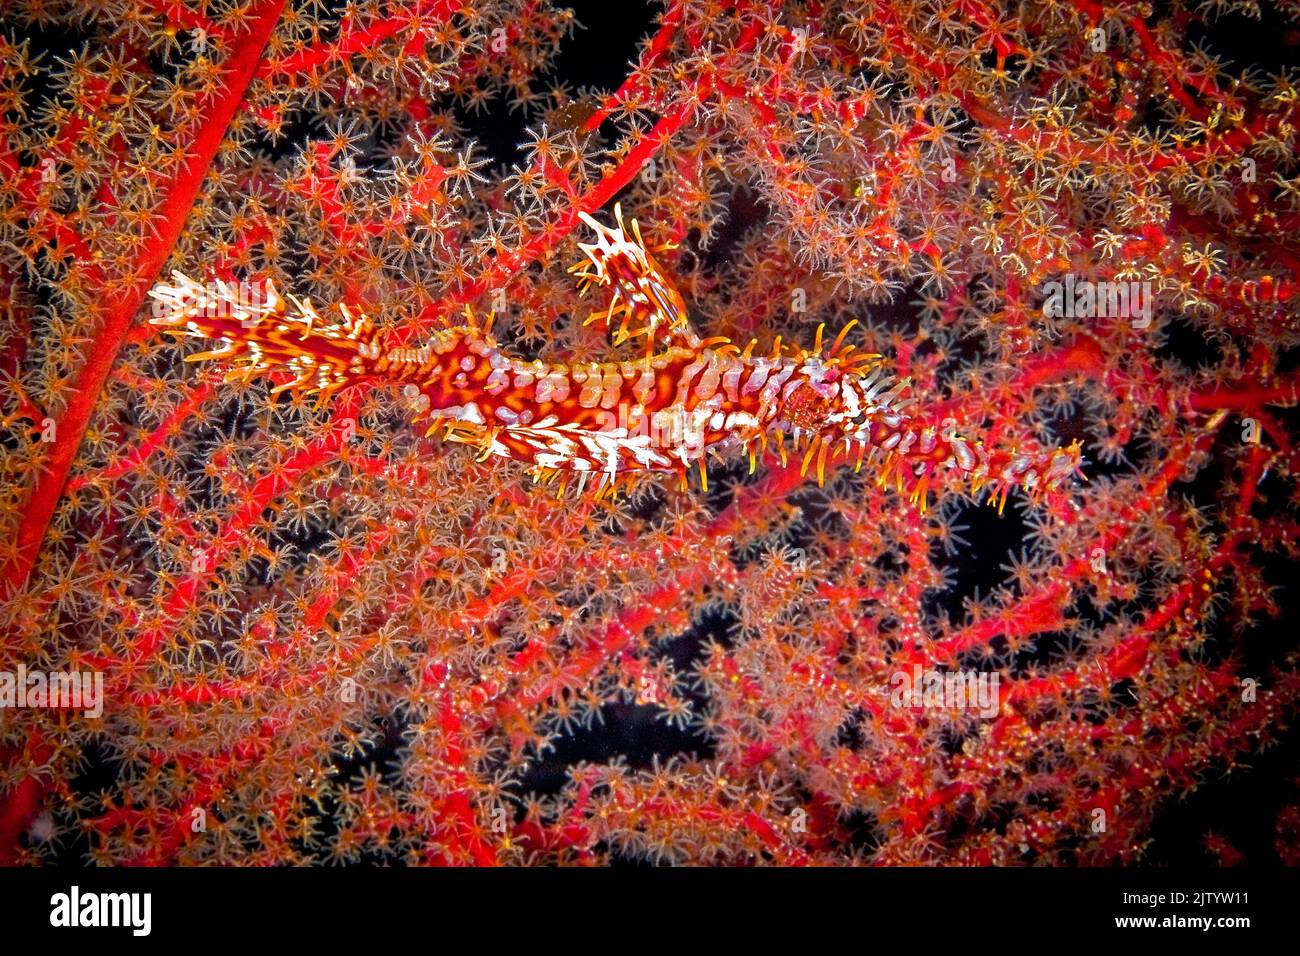 Ornate ghost pipefish or Harlequin ghost pipefish (Solenostomus paradoxus), at a red horn coral, Ari Atoll, Maldives, Indian Ocean, Asia Stock Photo